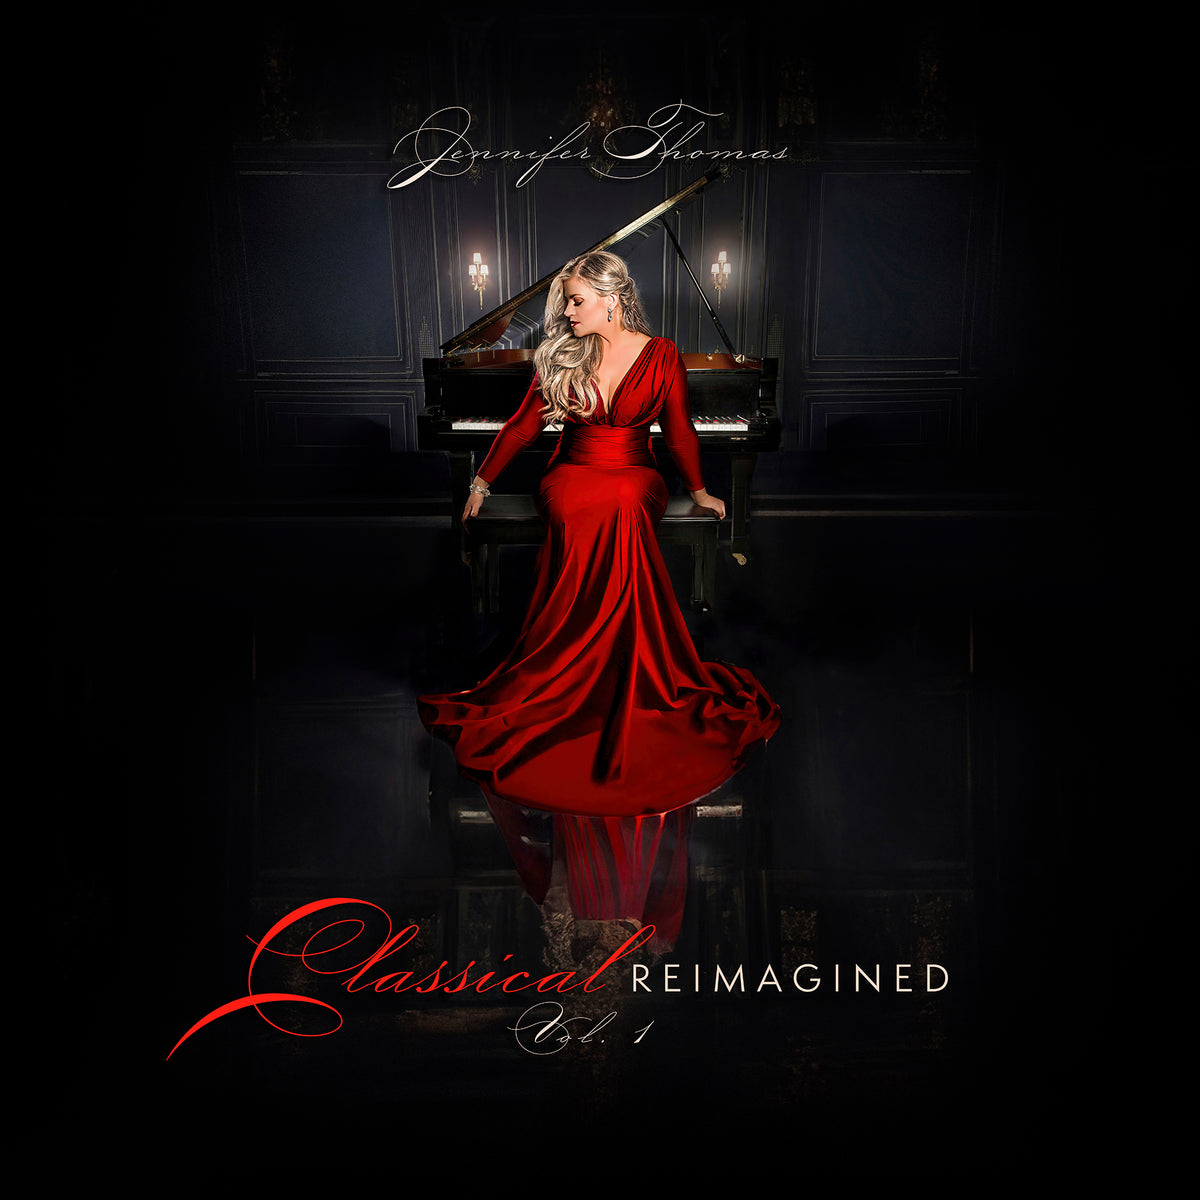 The Classical Reimagined Collection